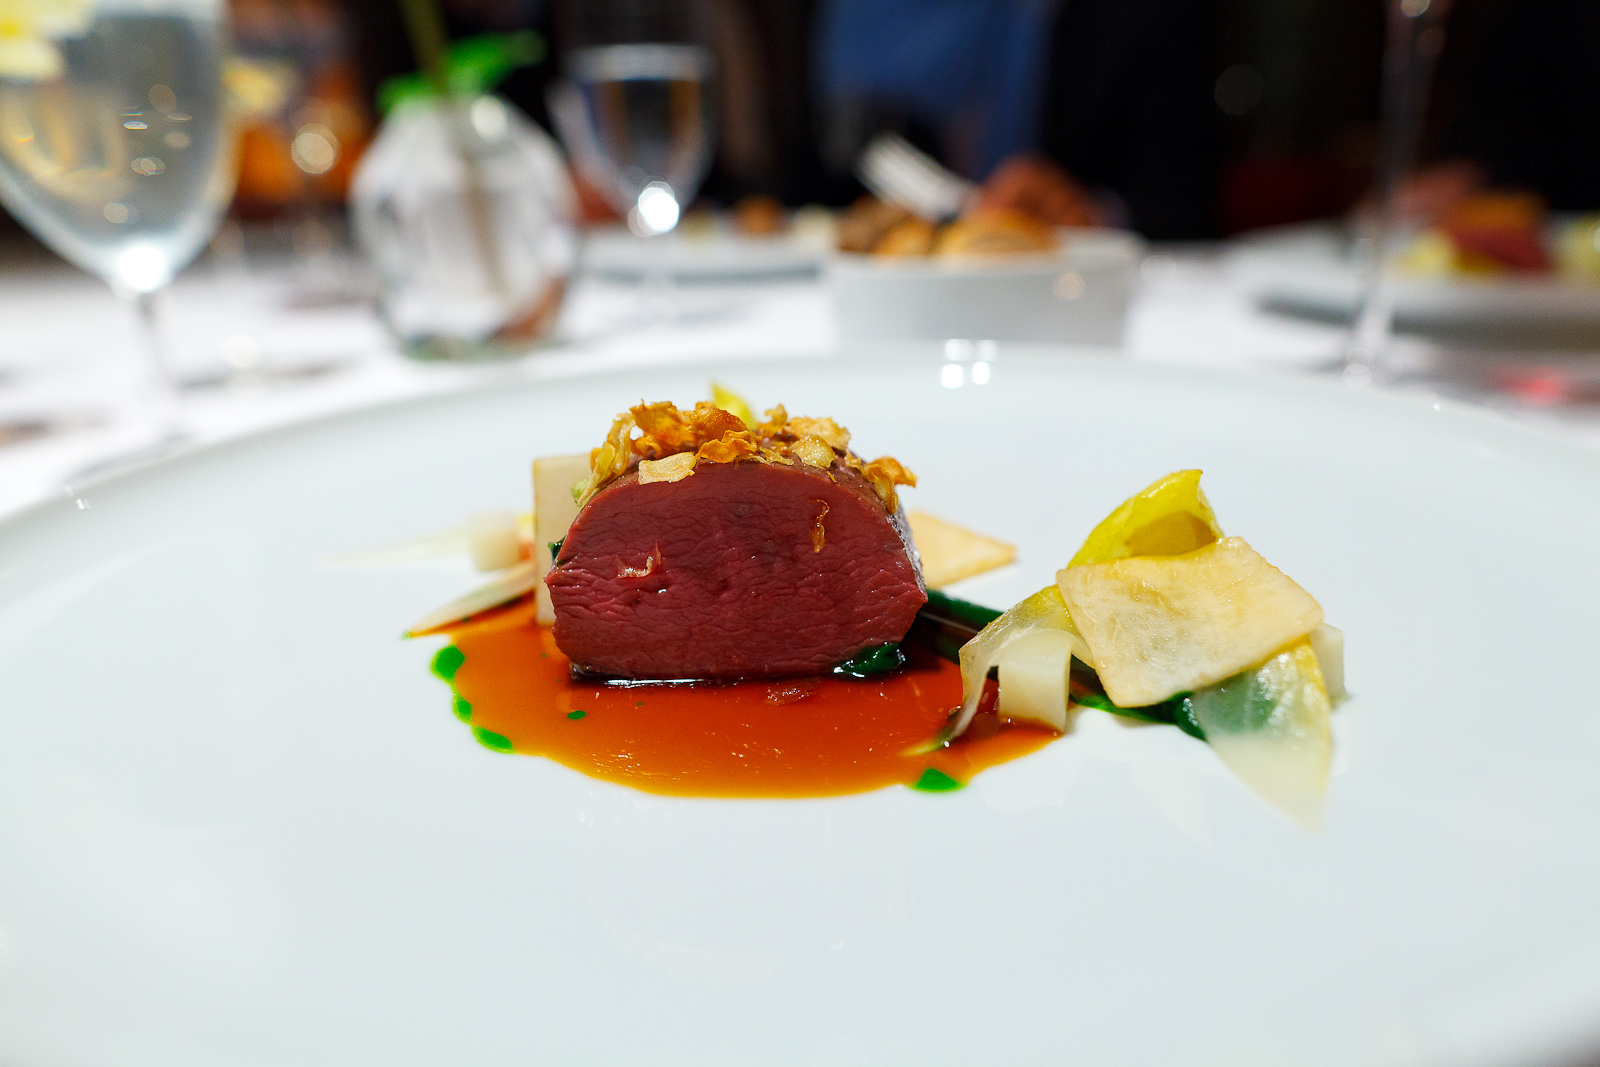 10th Course: Red deer calf from the Altmark region, parsley, vineyard peach and chicory, interior